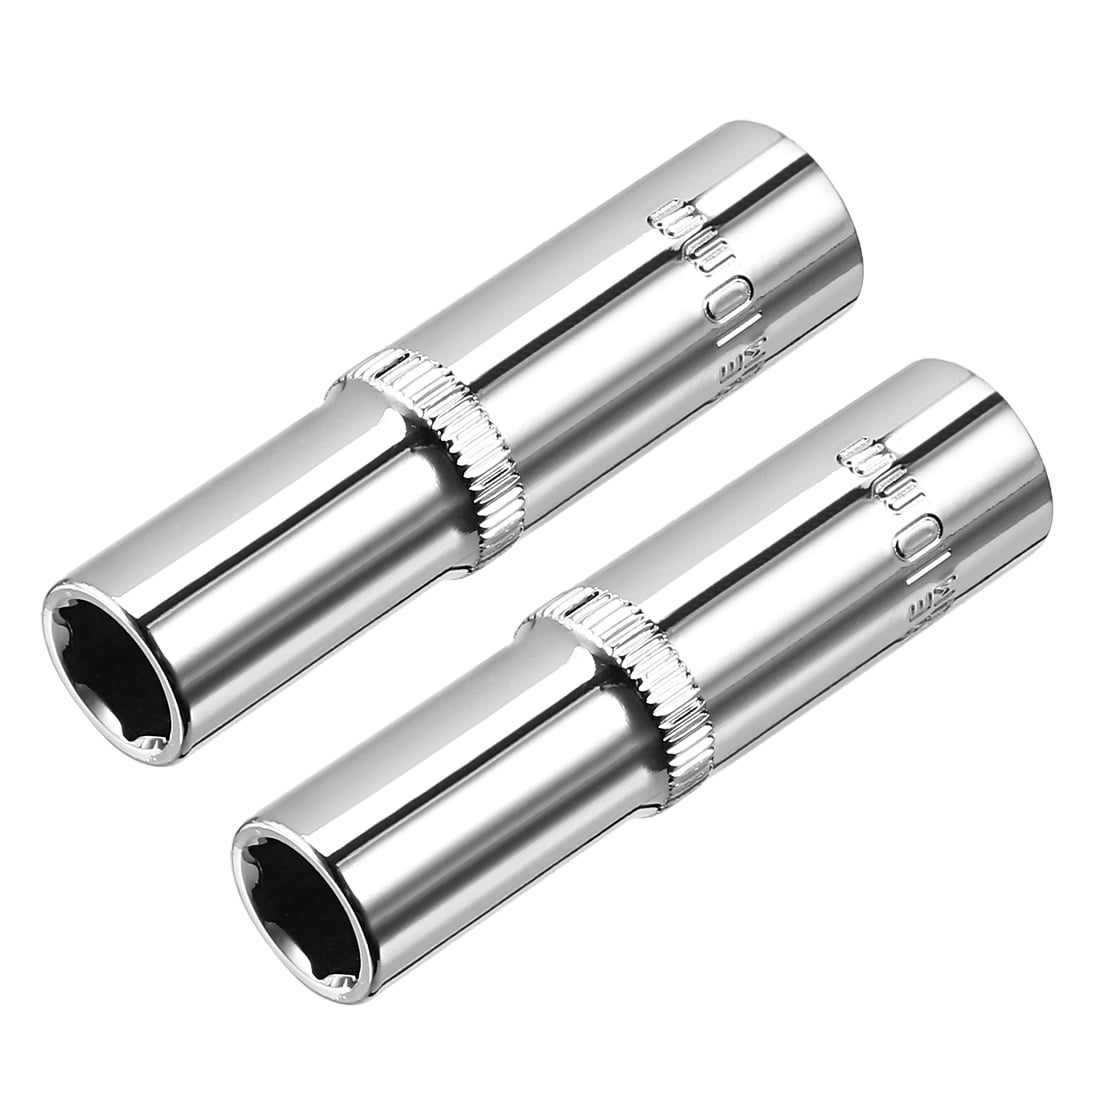 CR-V Steel 38mm Length Shallow SAE Sizes 2pcs uxcell 1/2-Inch by 5/8-Inch 6-Point Impact Socket 